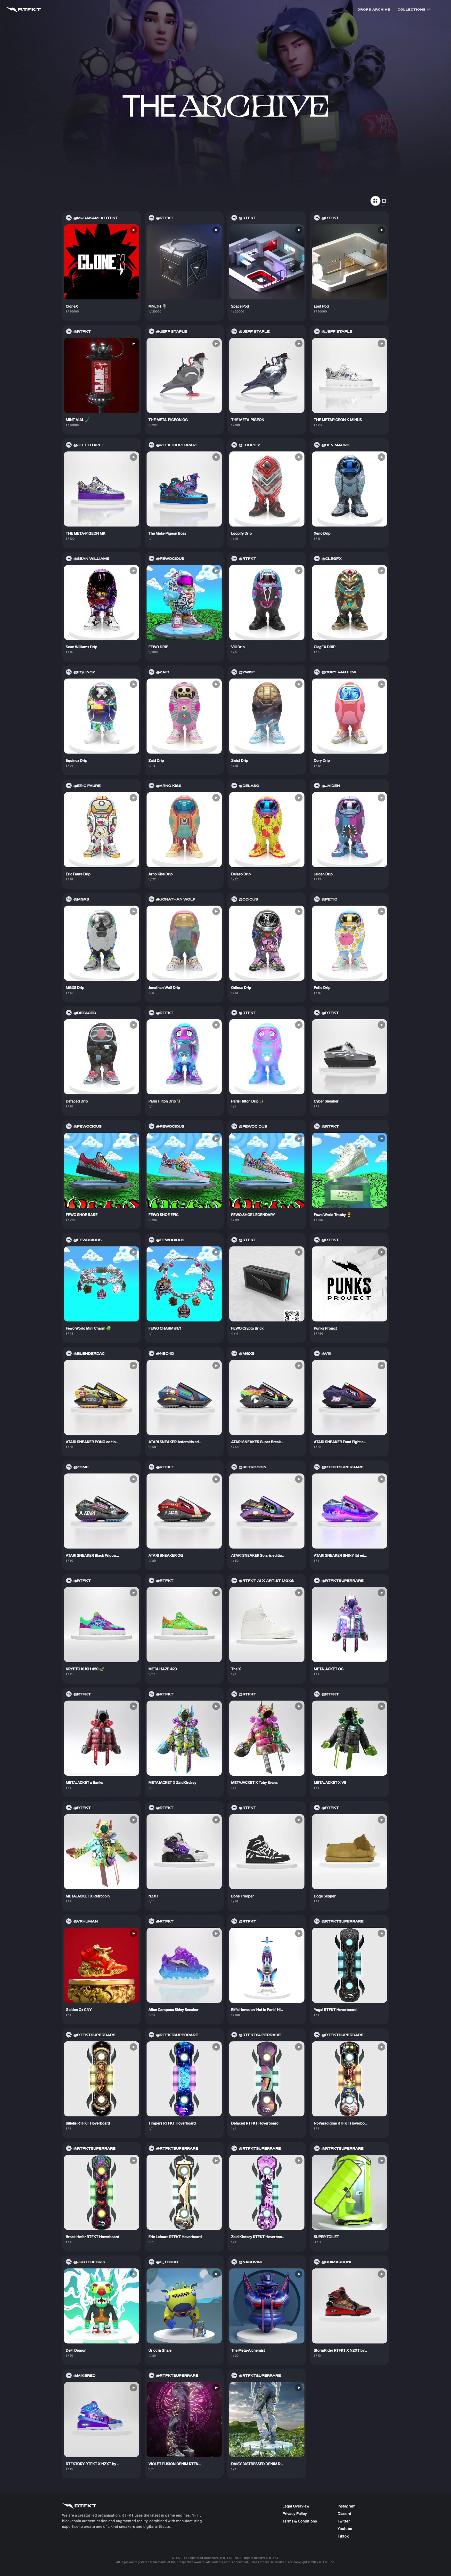 RTFKT Landing Page Example: Creators of virtual sneakers and collectibles, merging realities in fashion and gaming. We are a creator led organisation. RTFKT uses the latest in game engines, NFT , blockchain authentication and augmented reality, combined with manufacturing expertise to create one of a kind sneakers and digital artifacts.